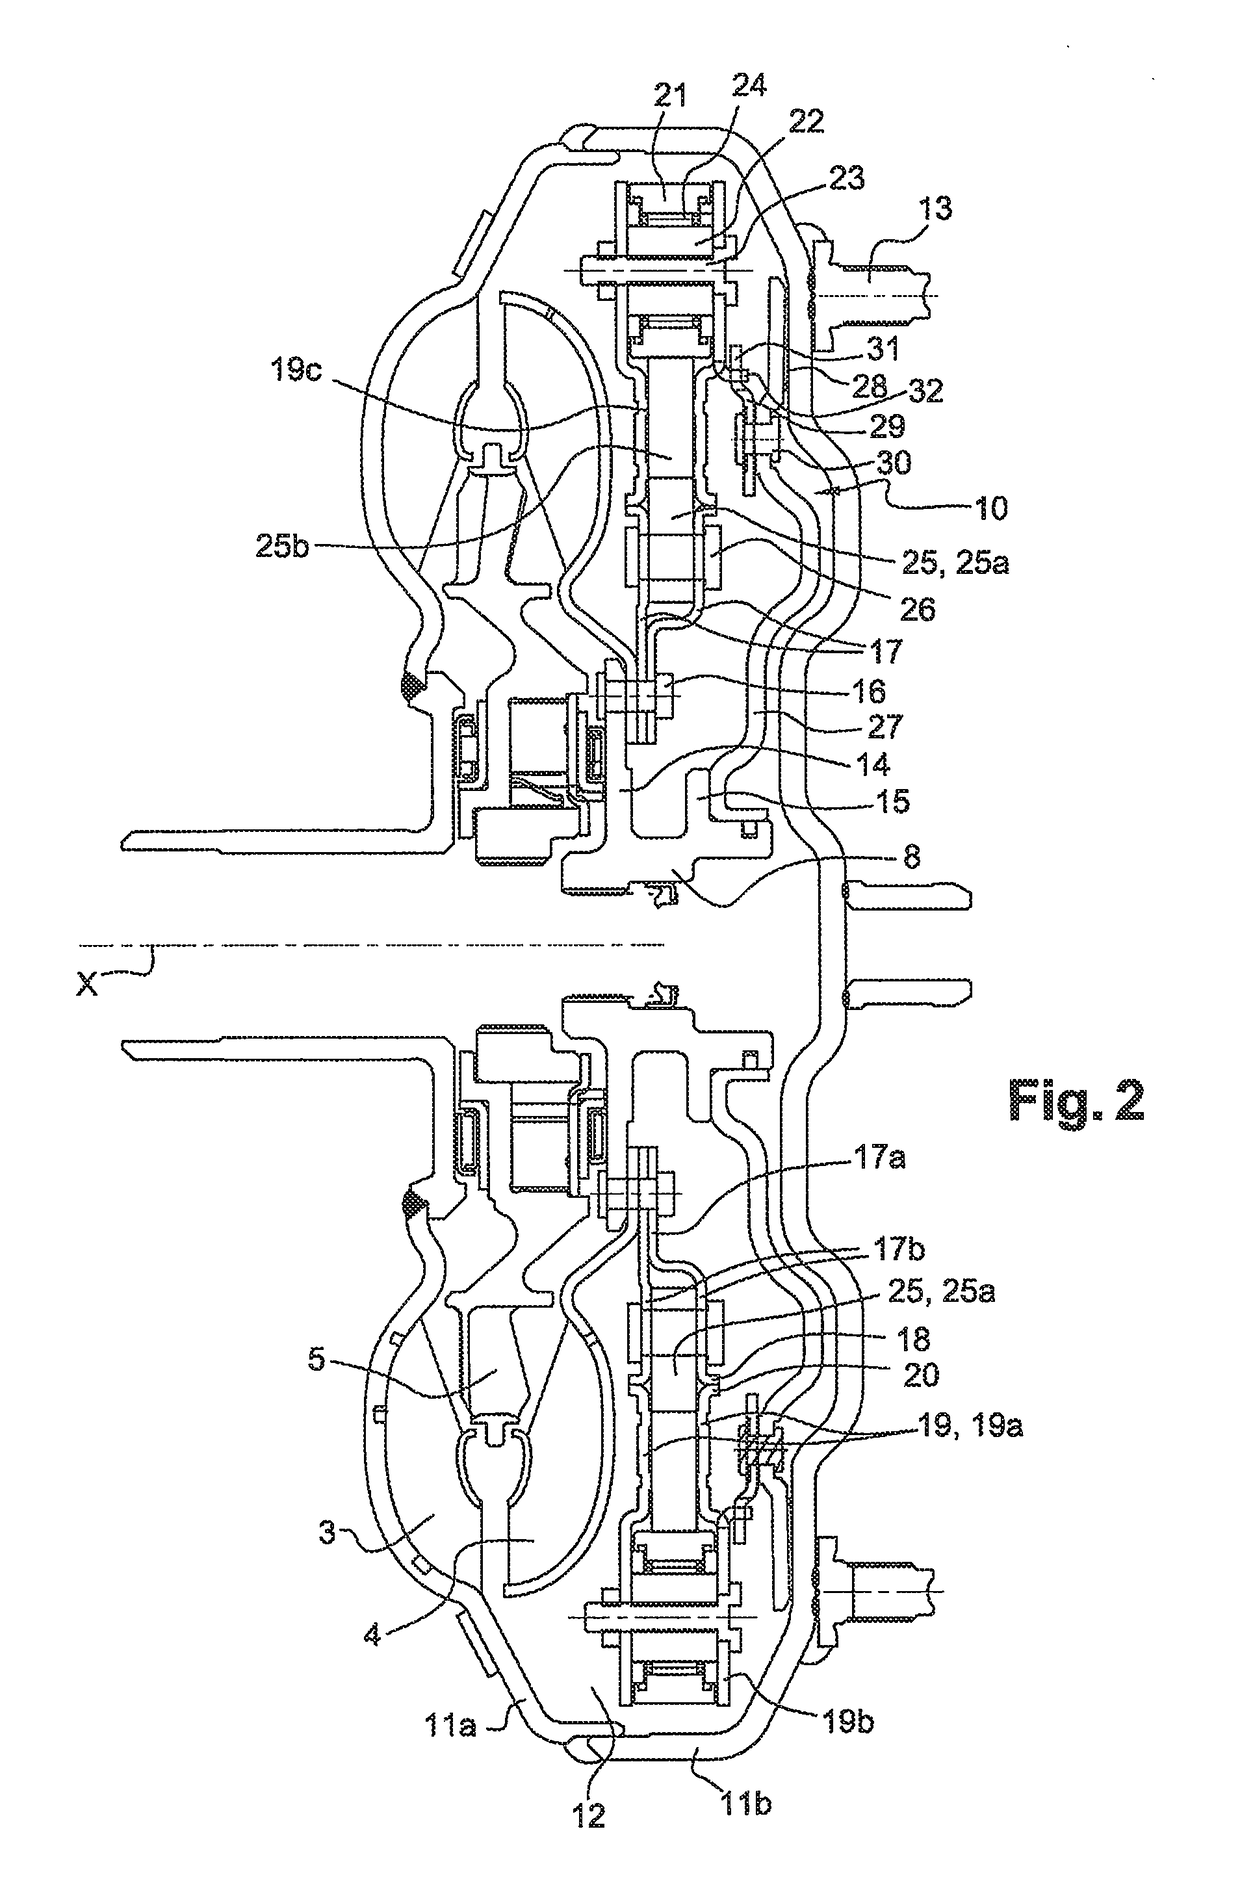 Hydrokinetic torque coupling device for a motor vehicle